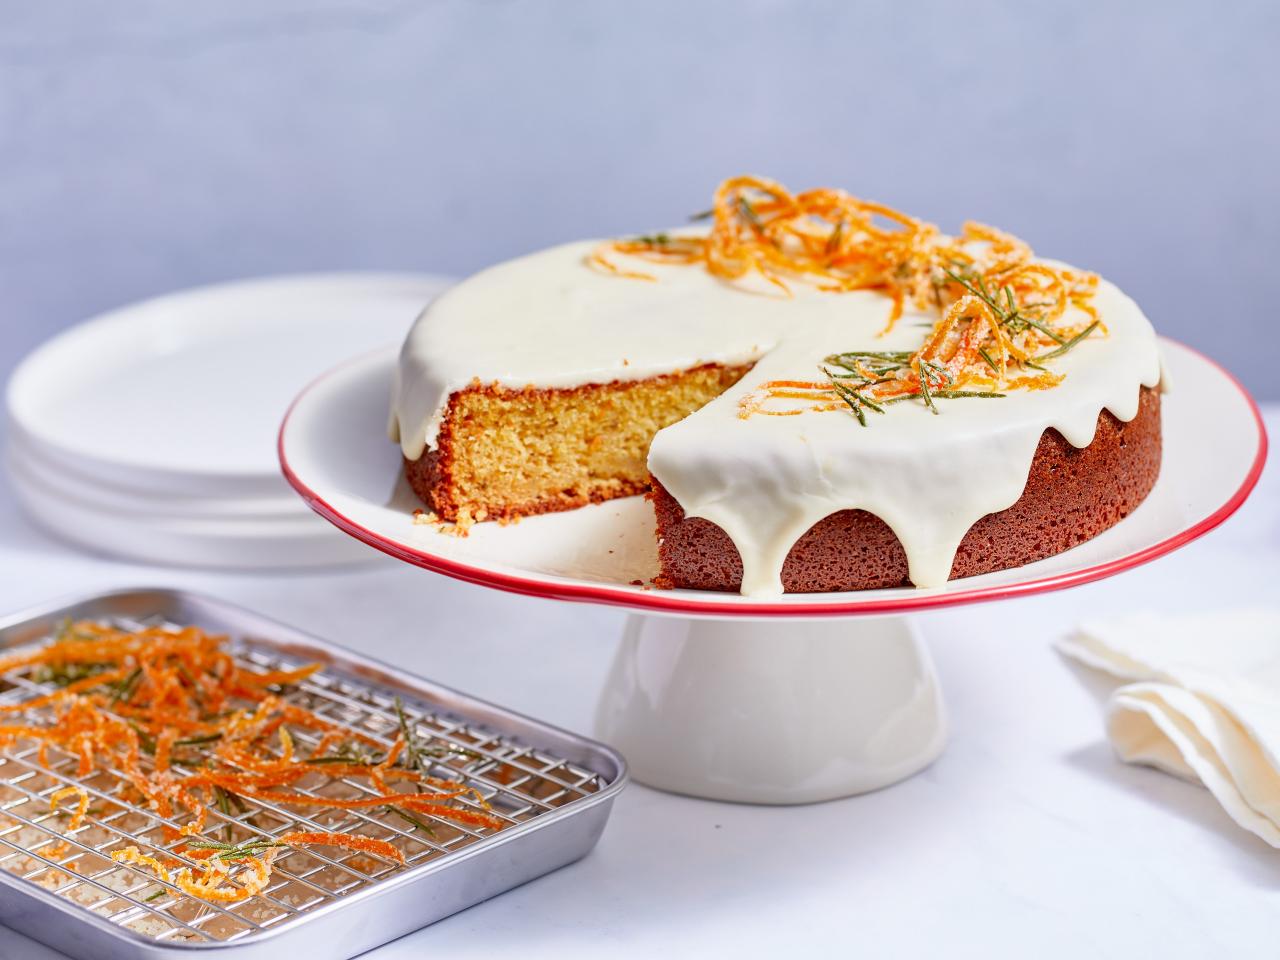 Orange Olive Oil Cake with Yoghurt Frosting by The Healthy C